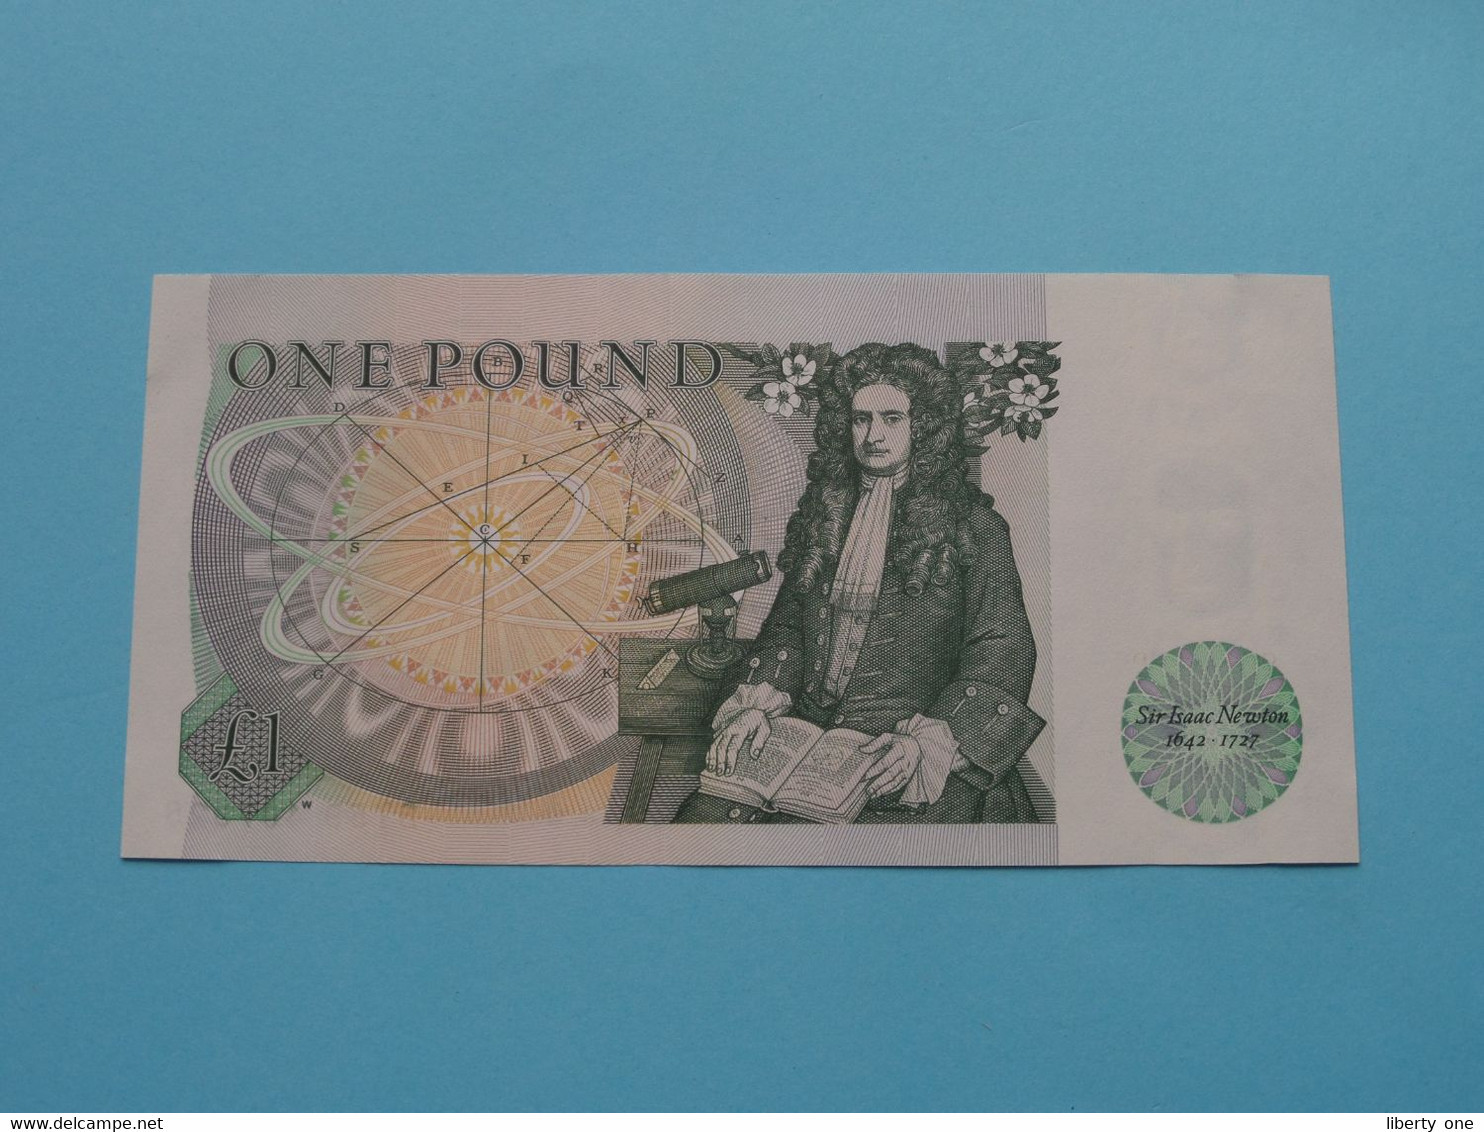 1 Pound ( BT59 407328 ) Bank Of ENGLAND ( For Grade, Please See Photo ) UNC ! - 1 Pound